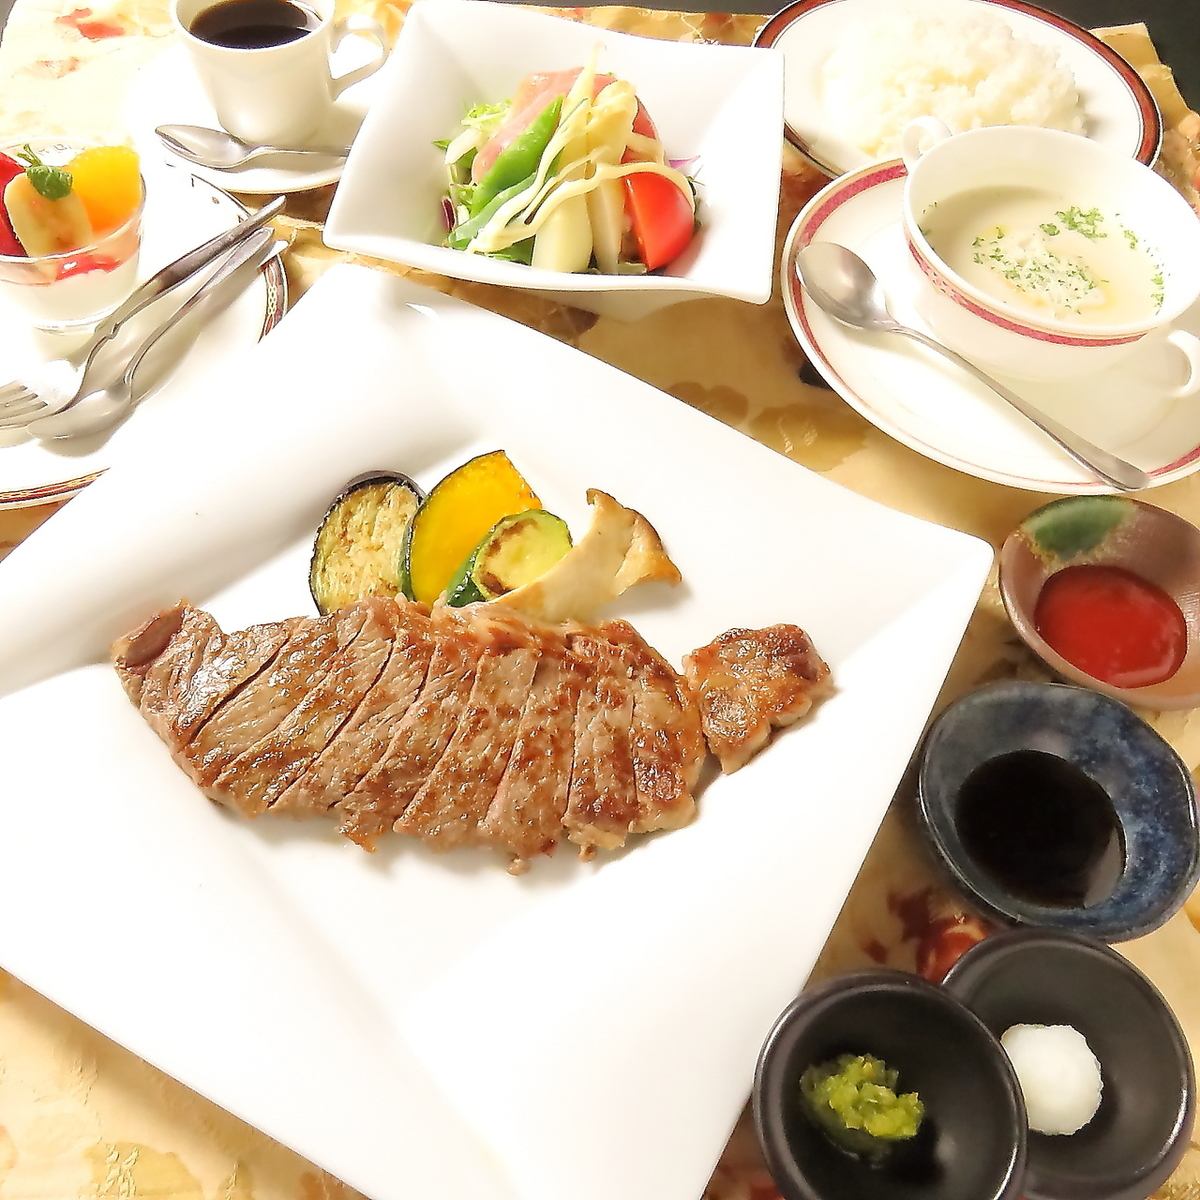 You can enjoy delicious meat and seafood dishes by grilling the selected ingredients on an iron plate.